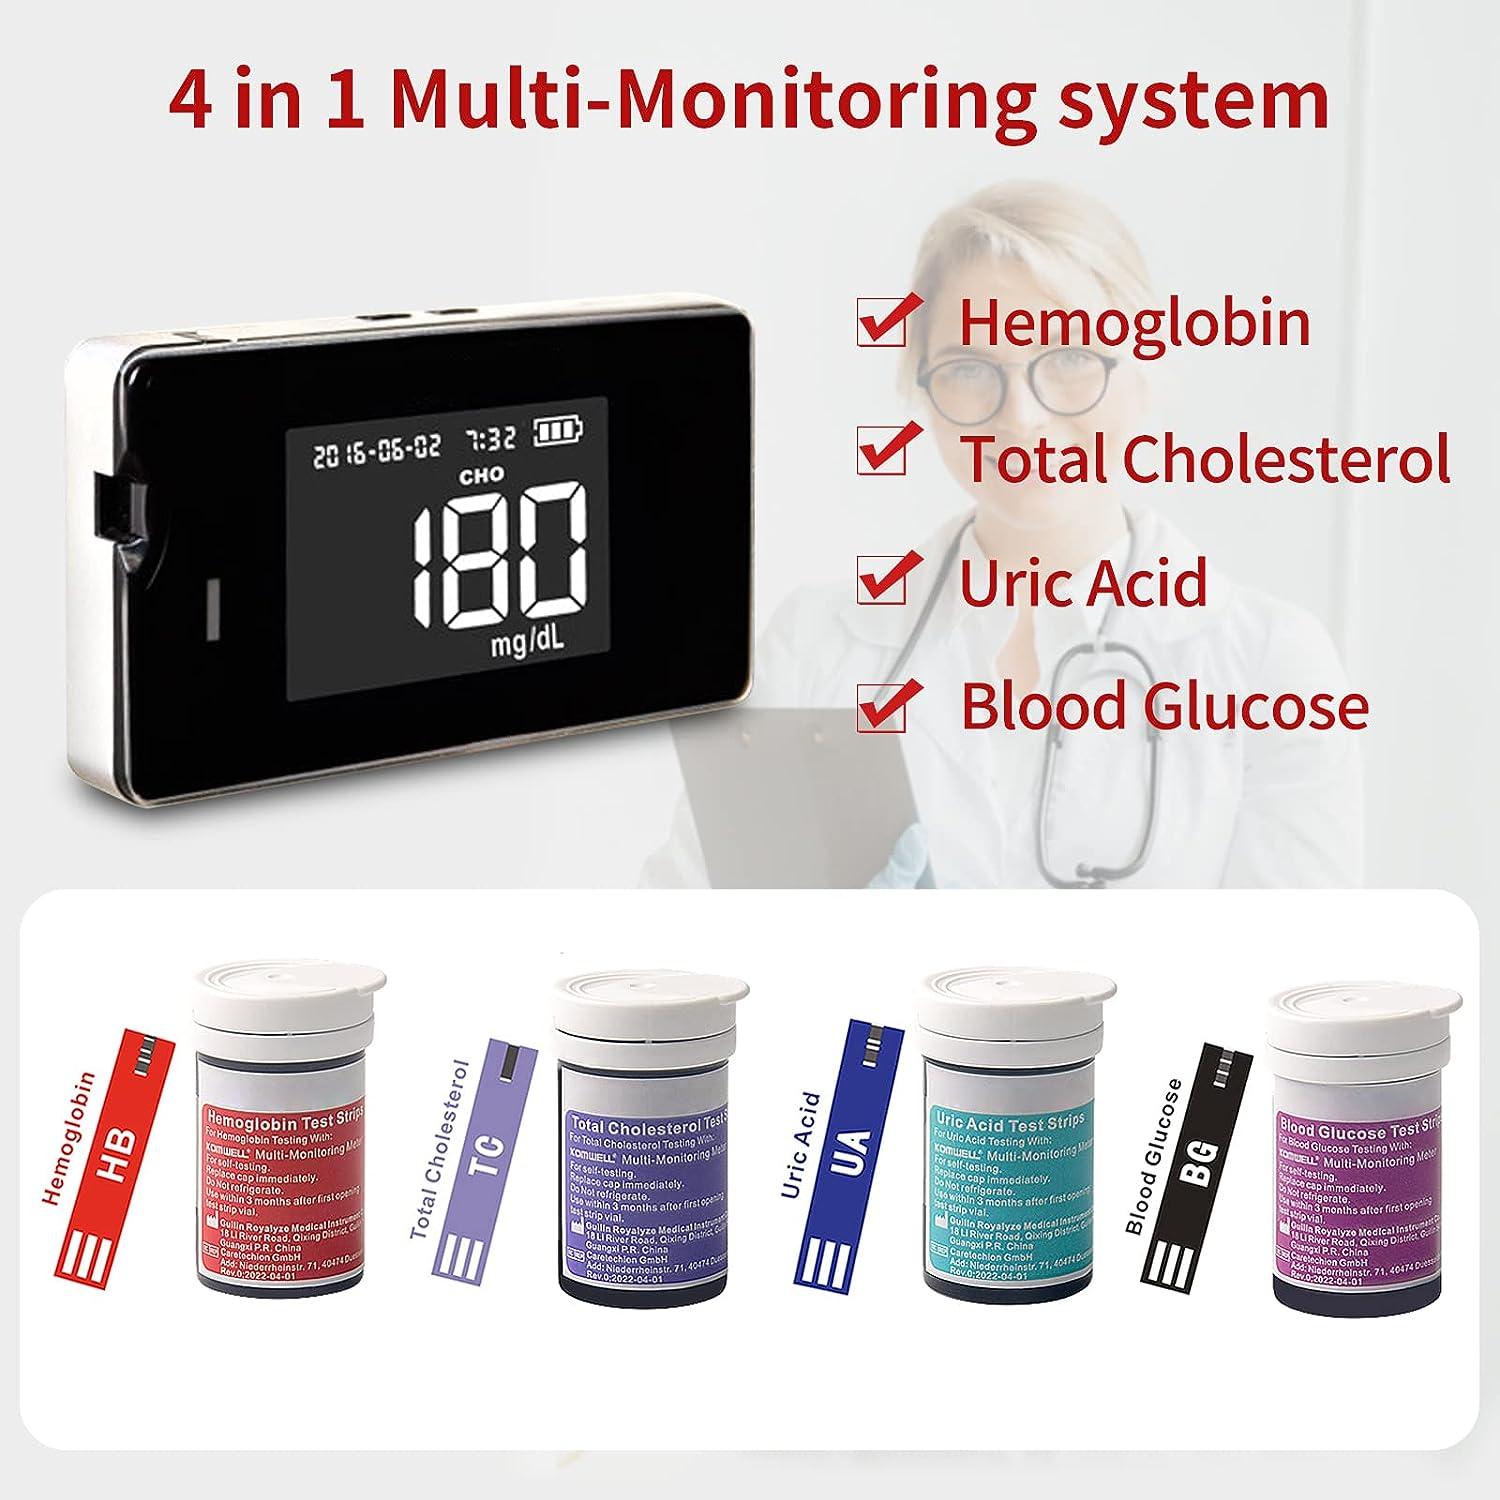 Accu-Answer Uric Acid Test Stirps (The Meter is not Included) - 25 Test  Strips Total (1 * 25 Test Strips/Box). Easy to Use at Home, Accurate,  Result